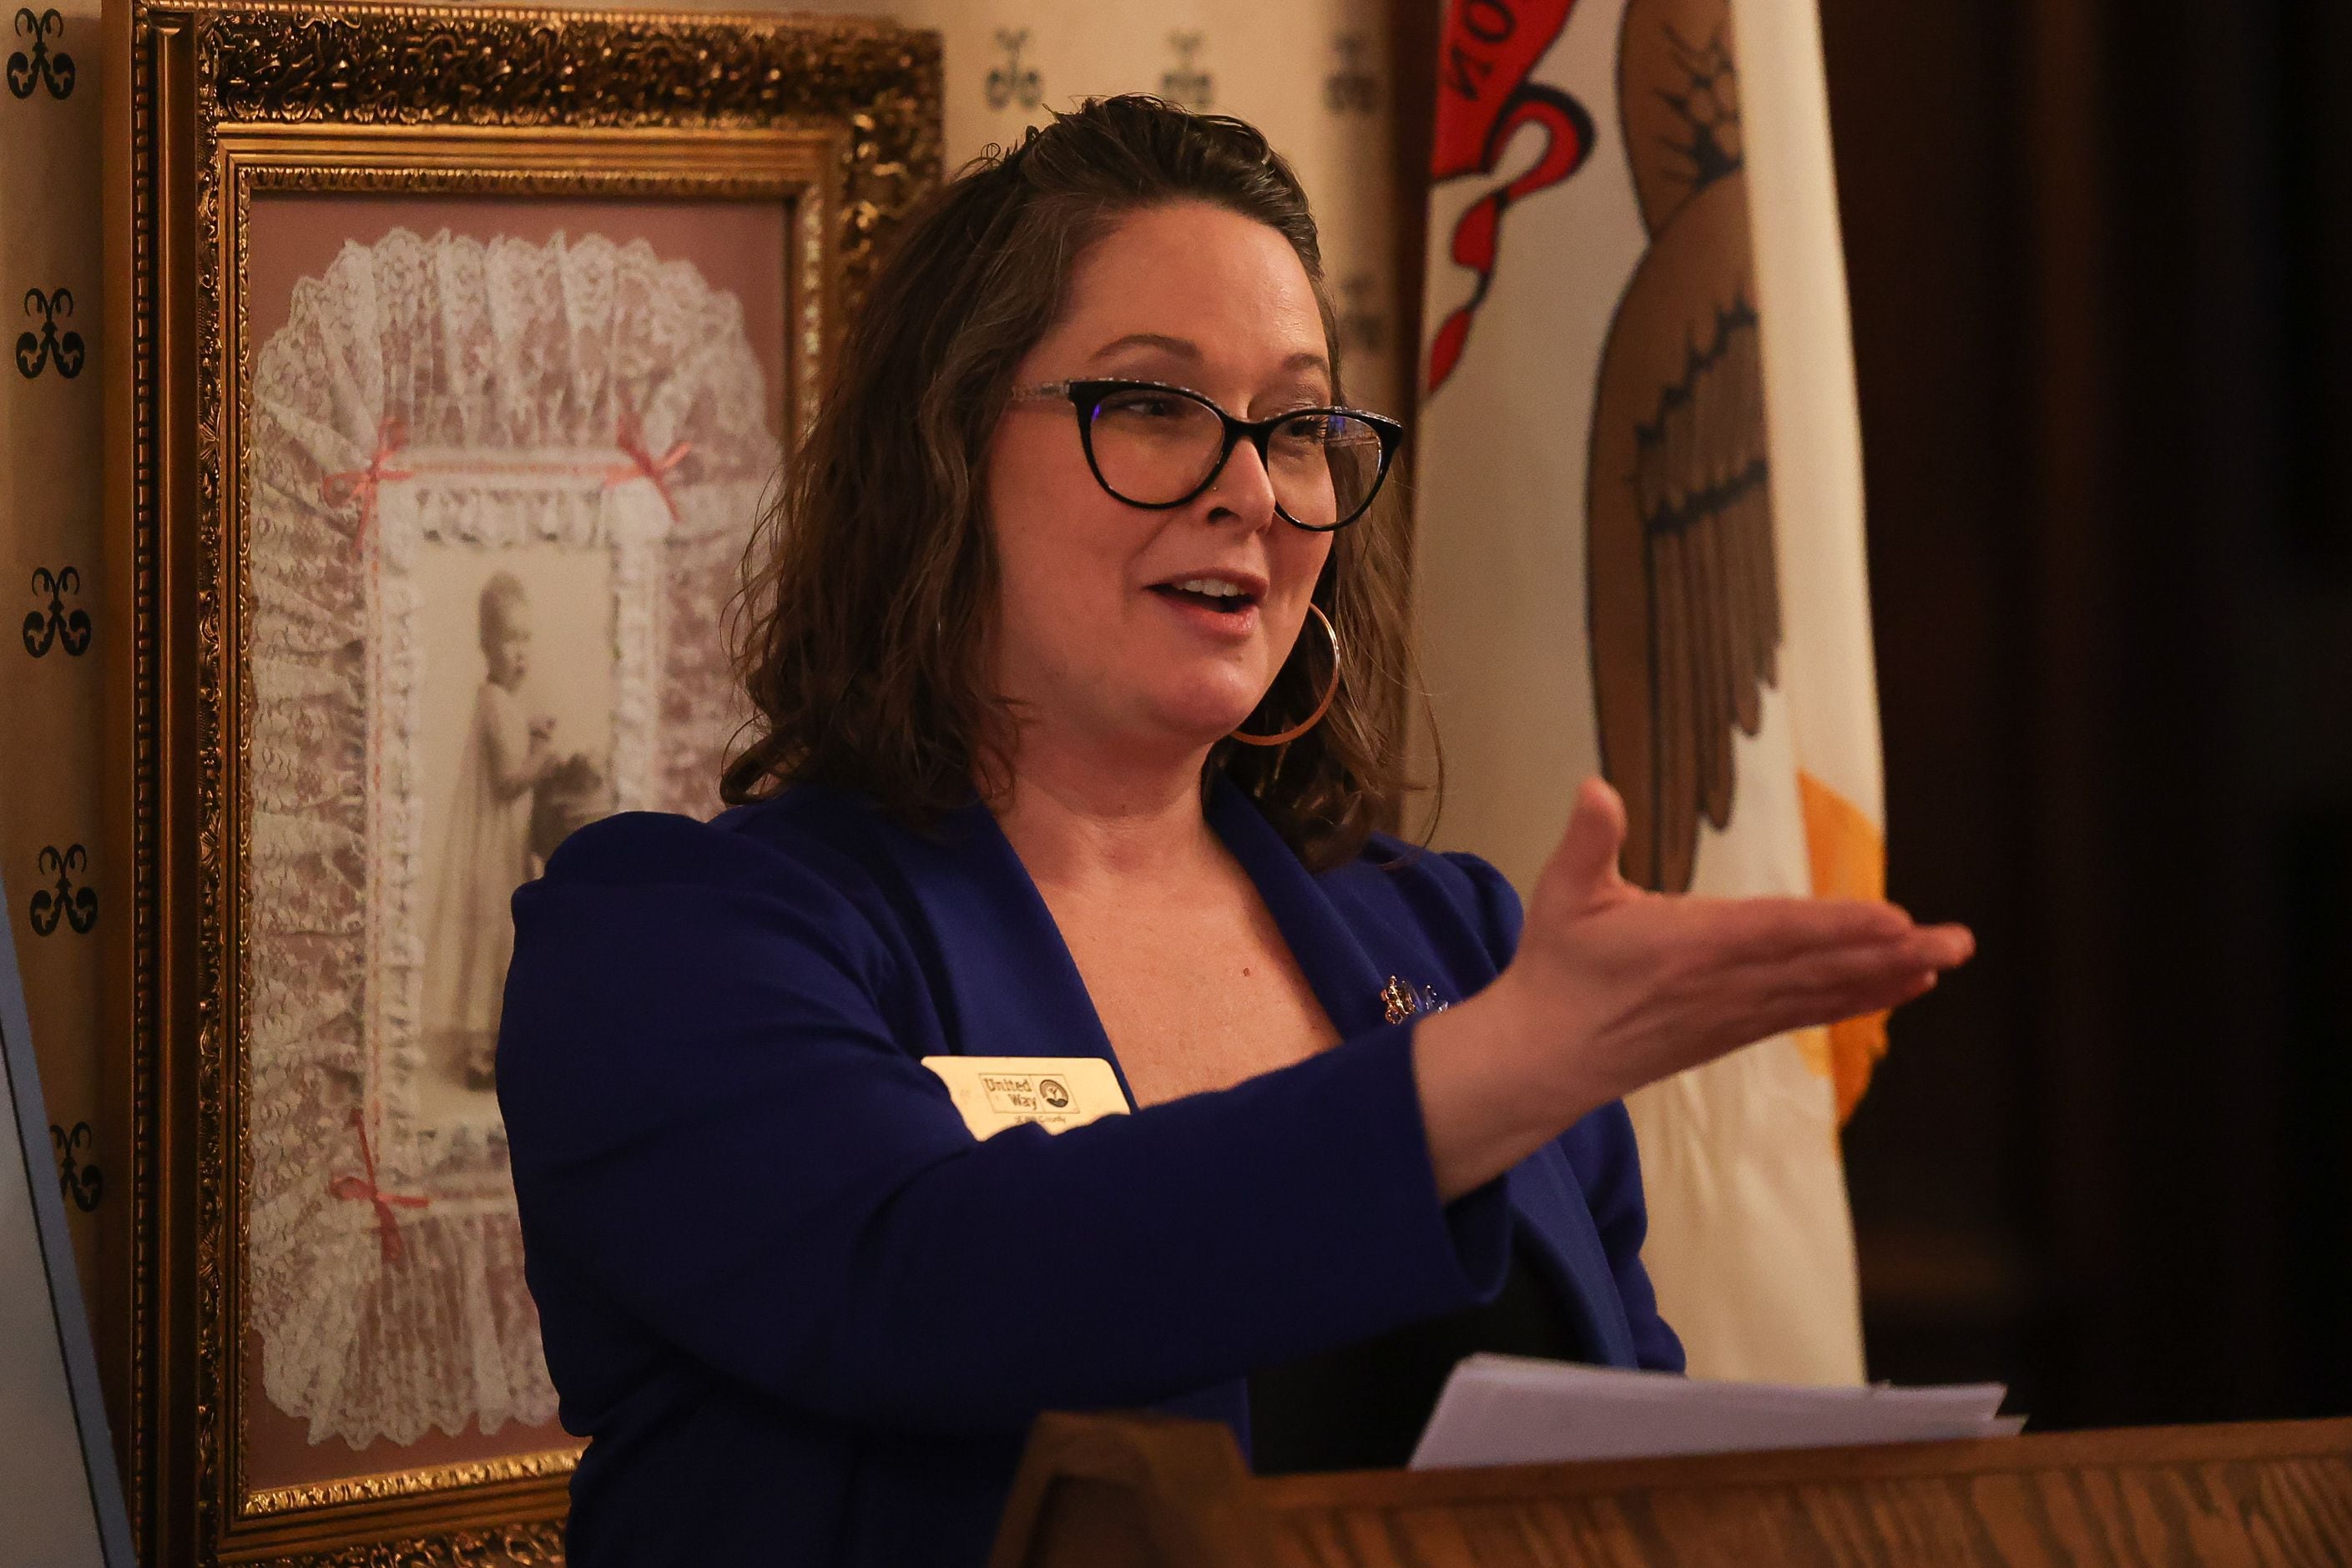 Sarah Oprzedek, United Way of Will County CEO, speaks at a United Way private event at the Jacob Henry Mansion on Thursday, February 23rd, 2023 in Joliet.